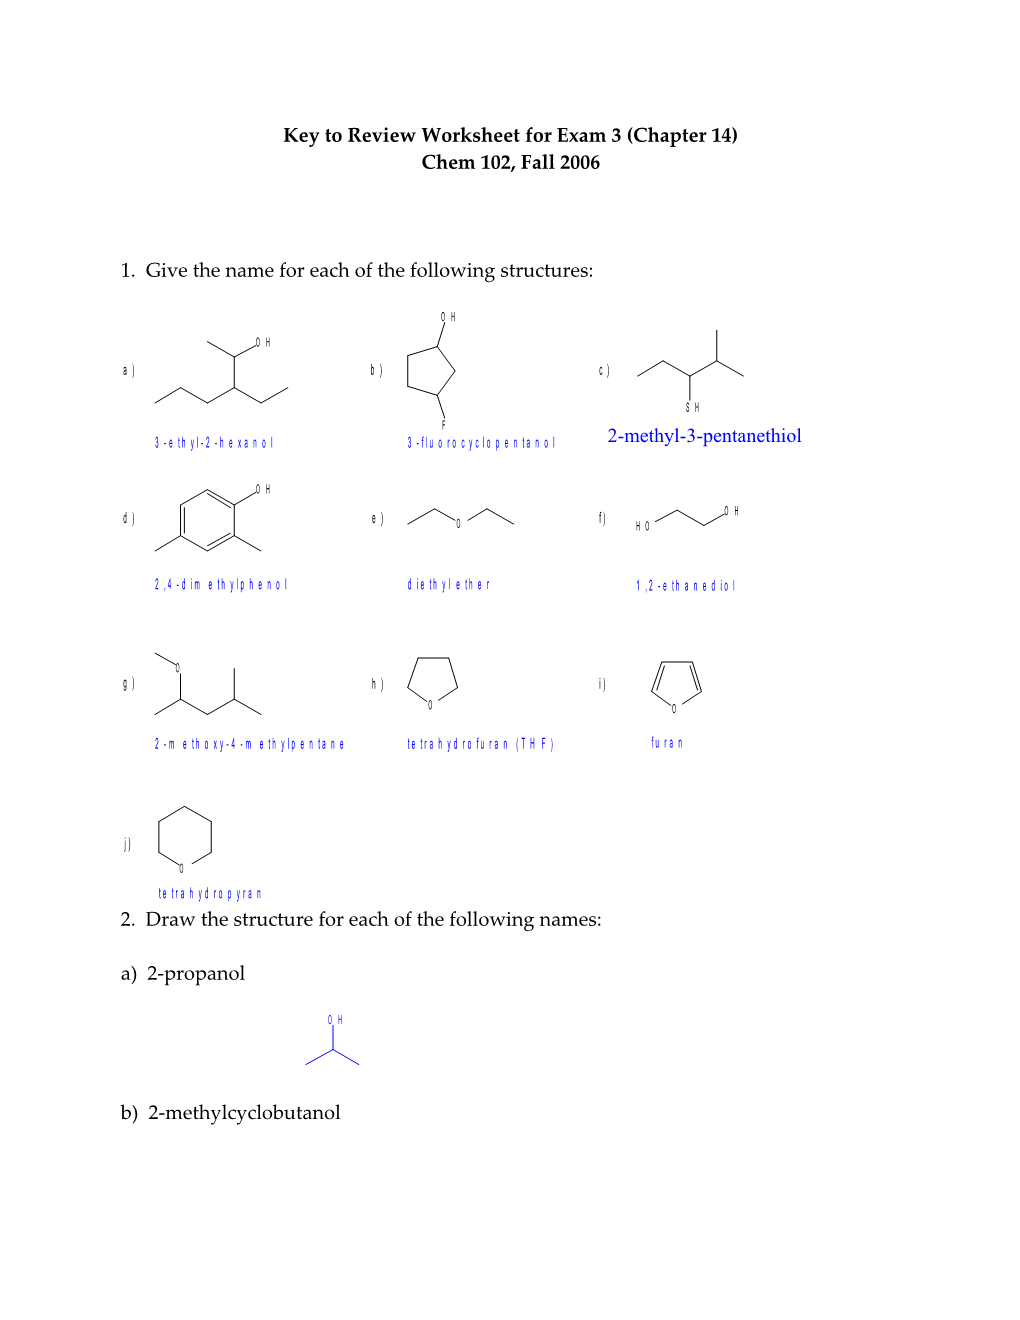 Key to Review Worksheet for Exam 3 (Chapter 14)